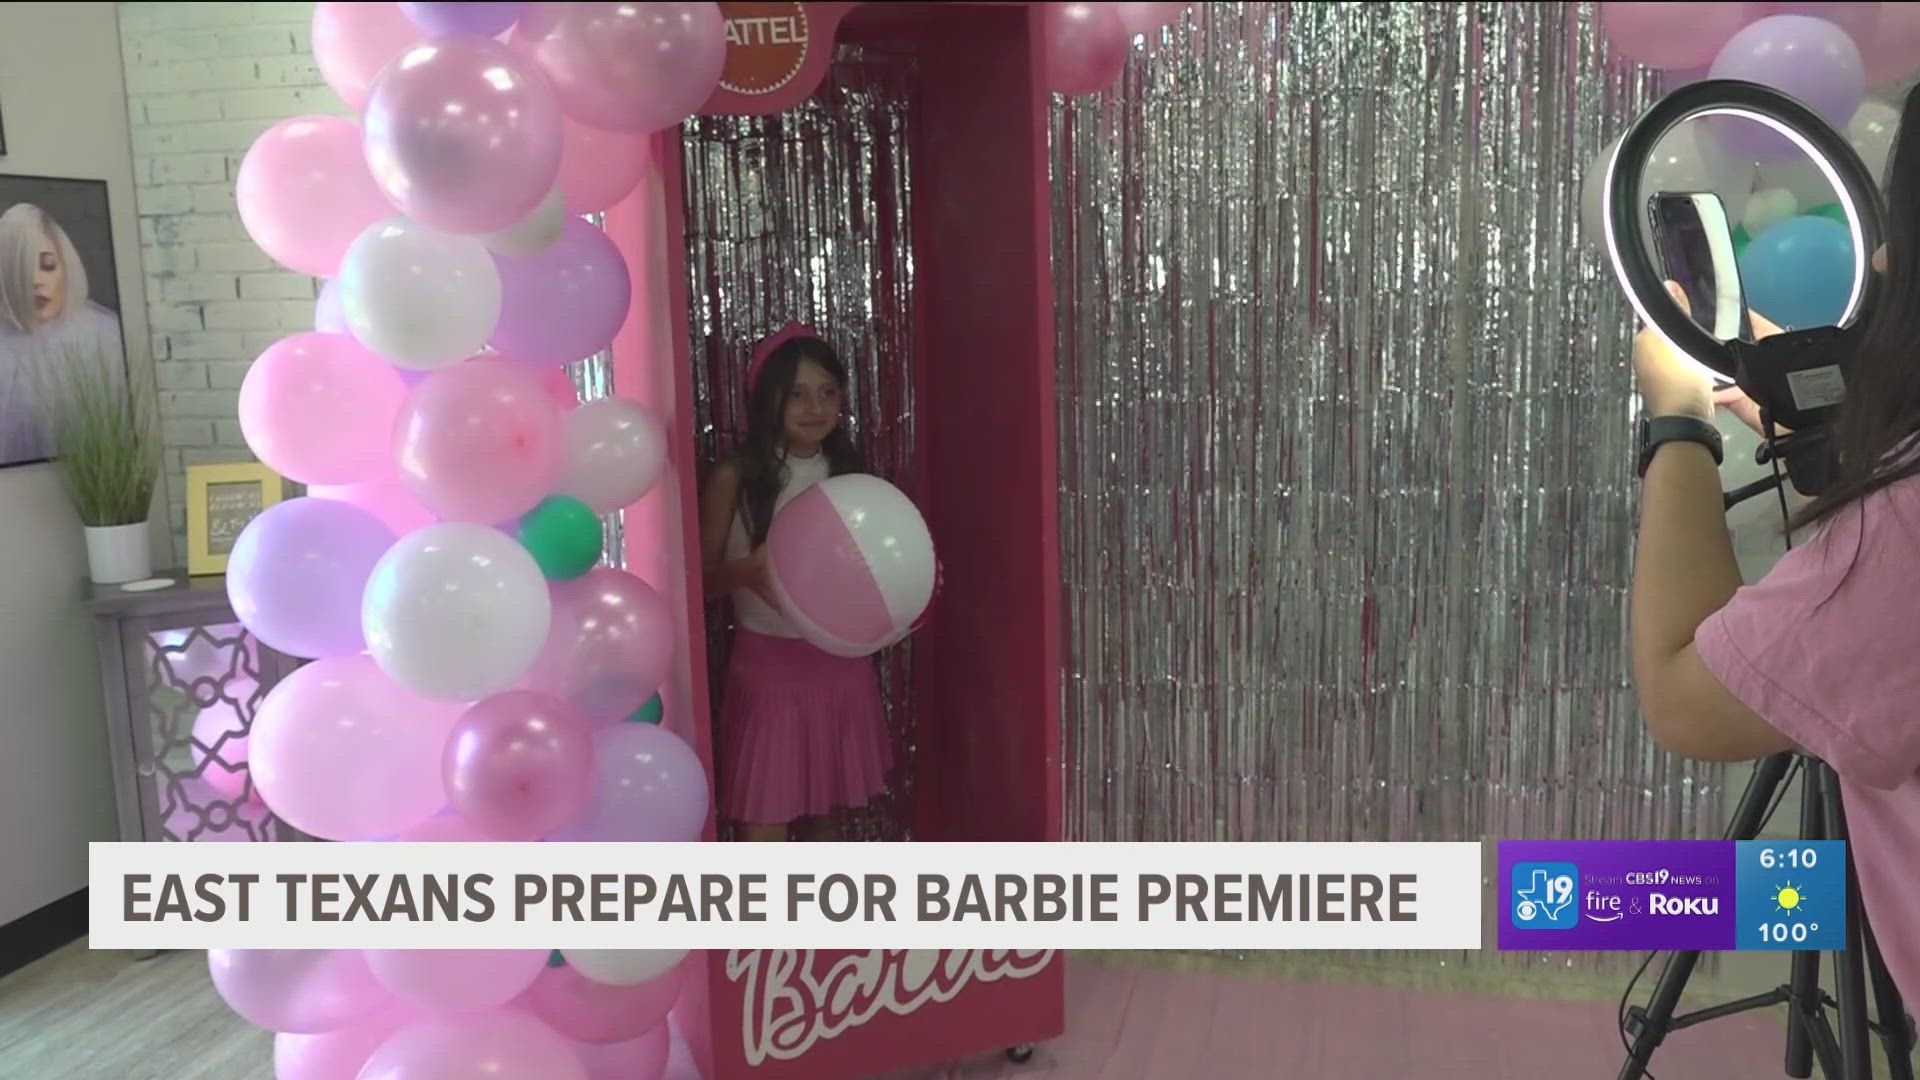 The Barbie movie premiere is inspiring fans to dress in pink and be fantastic.